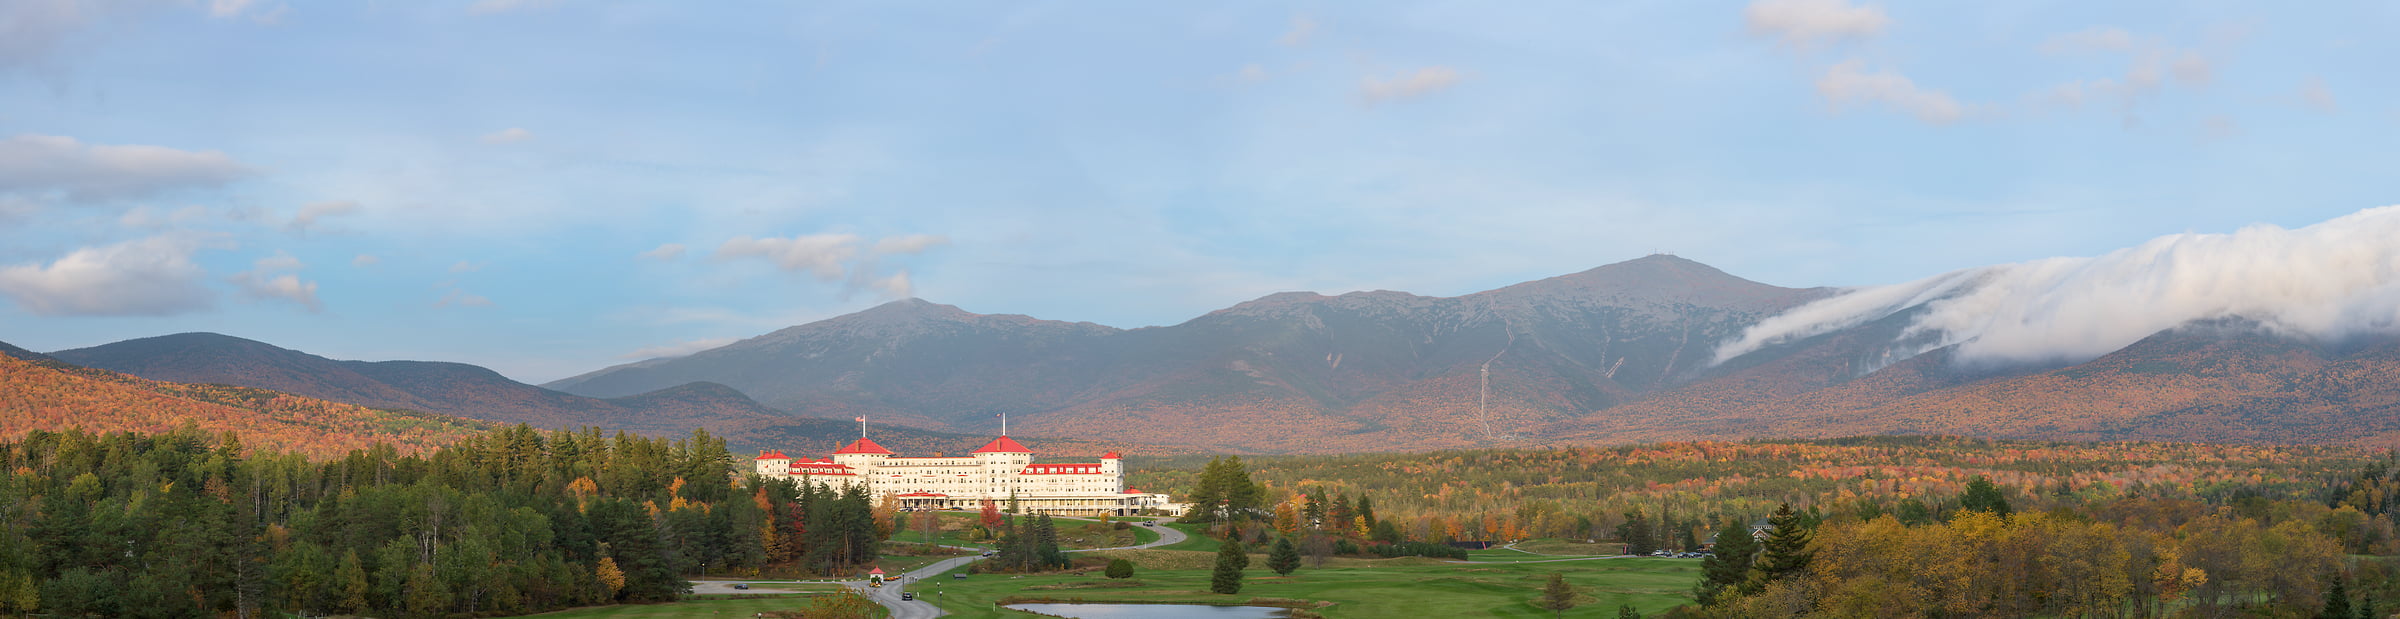 597 megapixels! A very high resolution, large-format VAST photo print of the Omni Mount Washington Resort with Mount Washington in the background; travel photograph created by Aaron Priest in Bretton Woods, Carroll, New Hampshire.